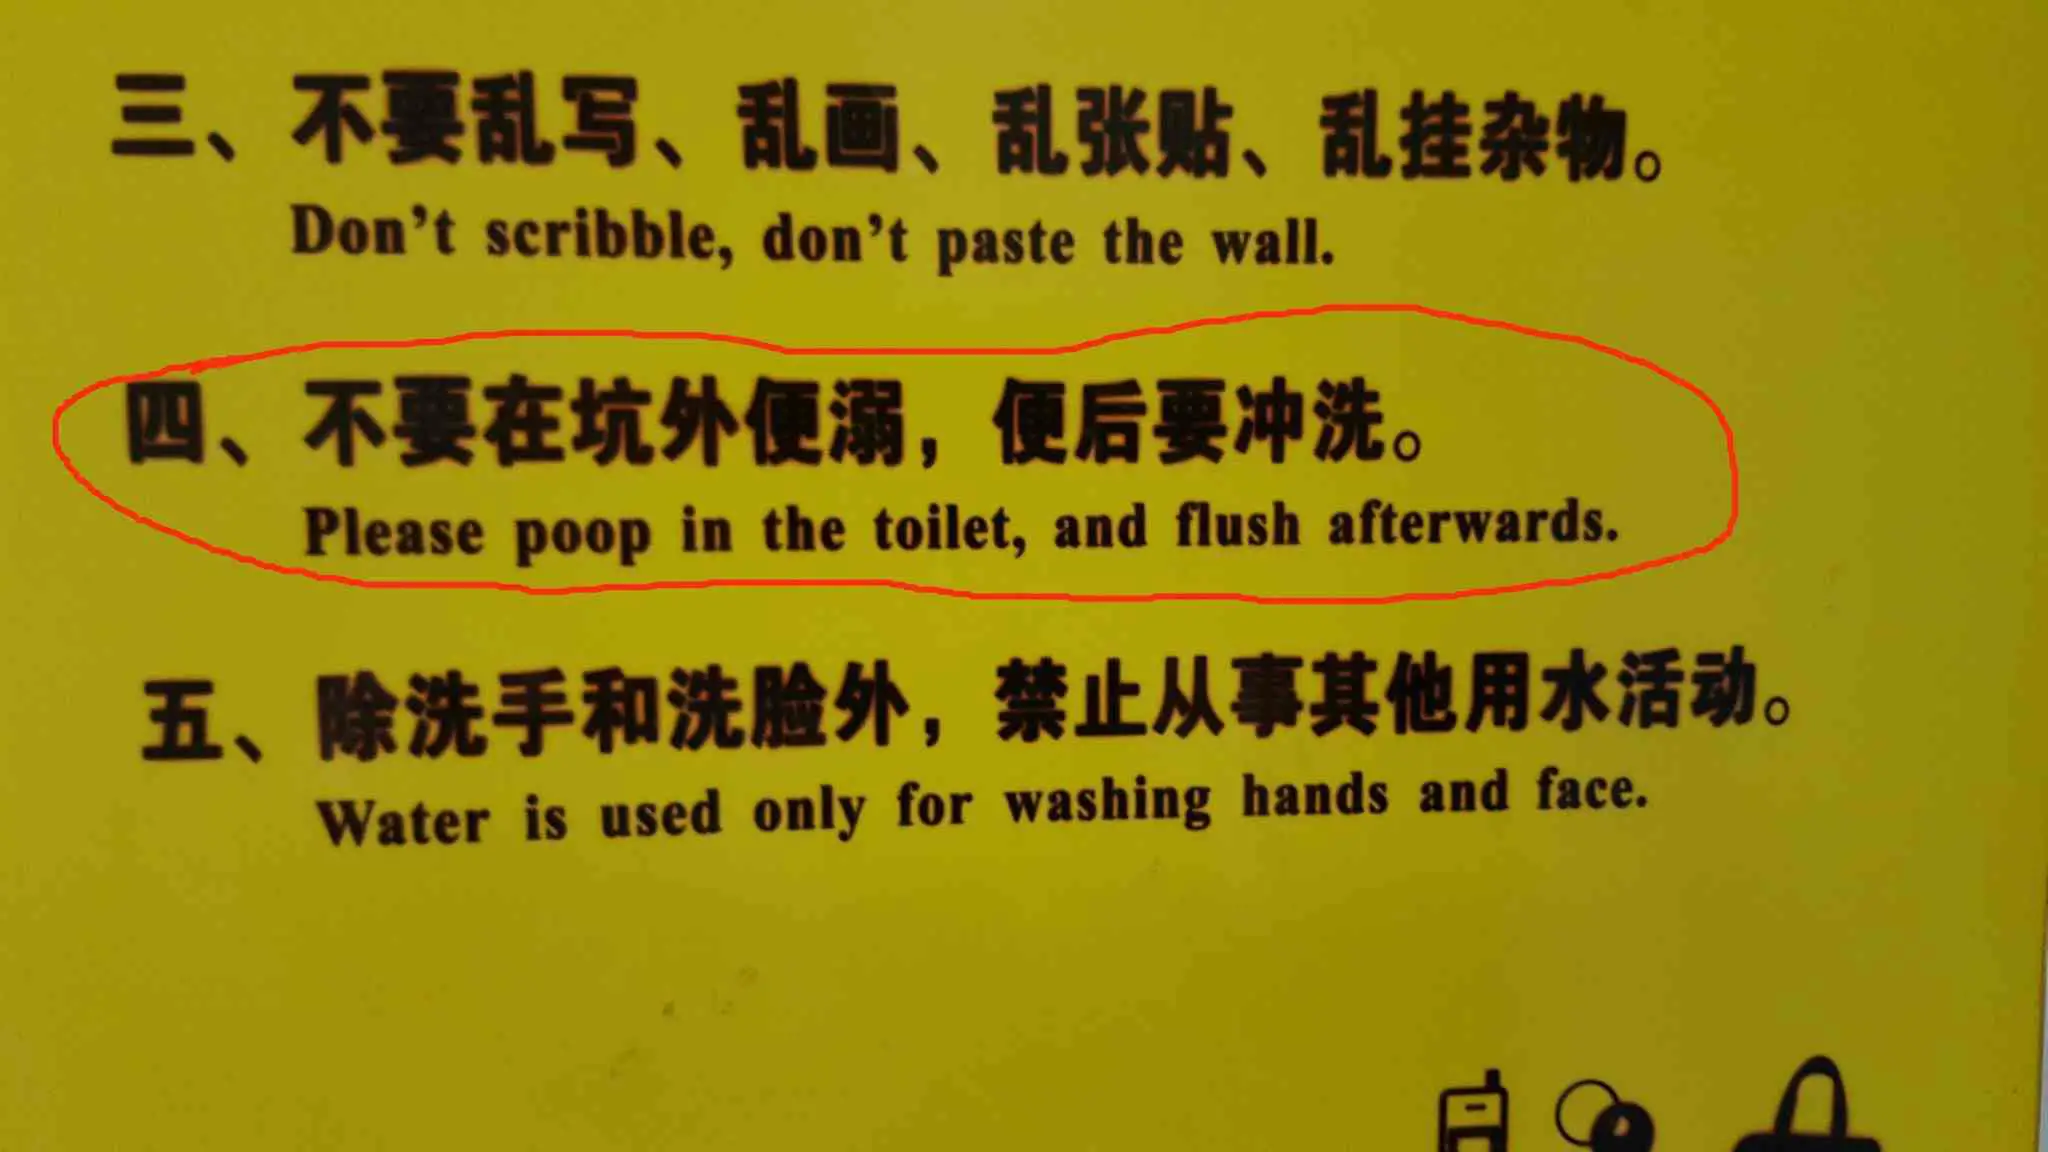 Please Poop In The Toilet | China Travel Blog | Translation Fails From China - Chingrish Time! | Chinglish, Chingrish, Translation Fails | Author: Anthony Bianco - The Travel Tart Blog